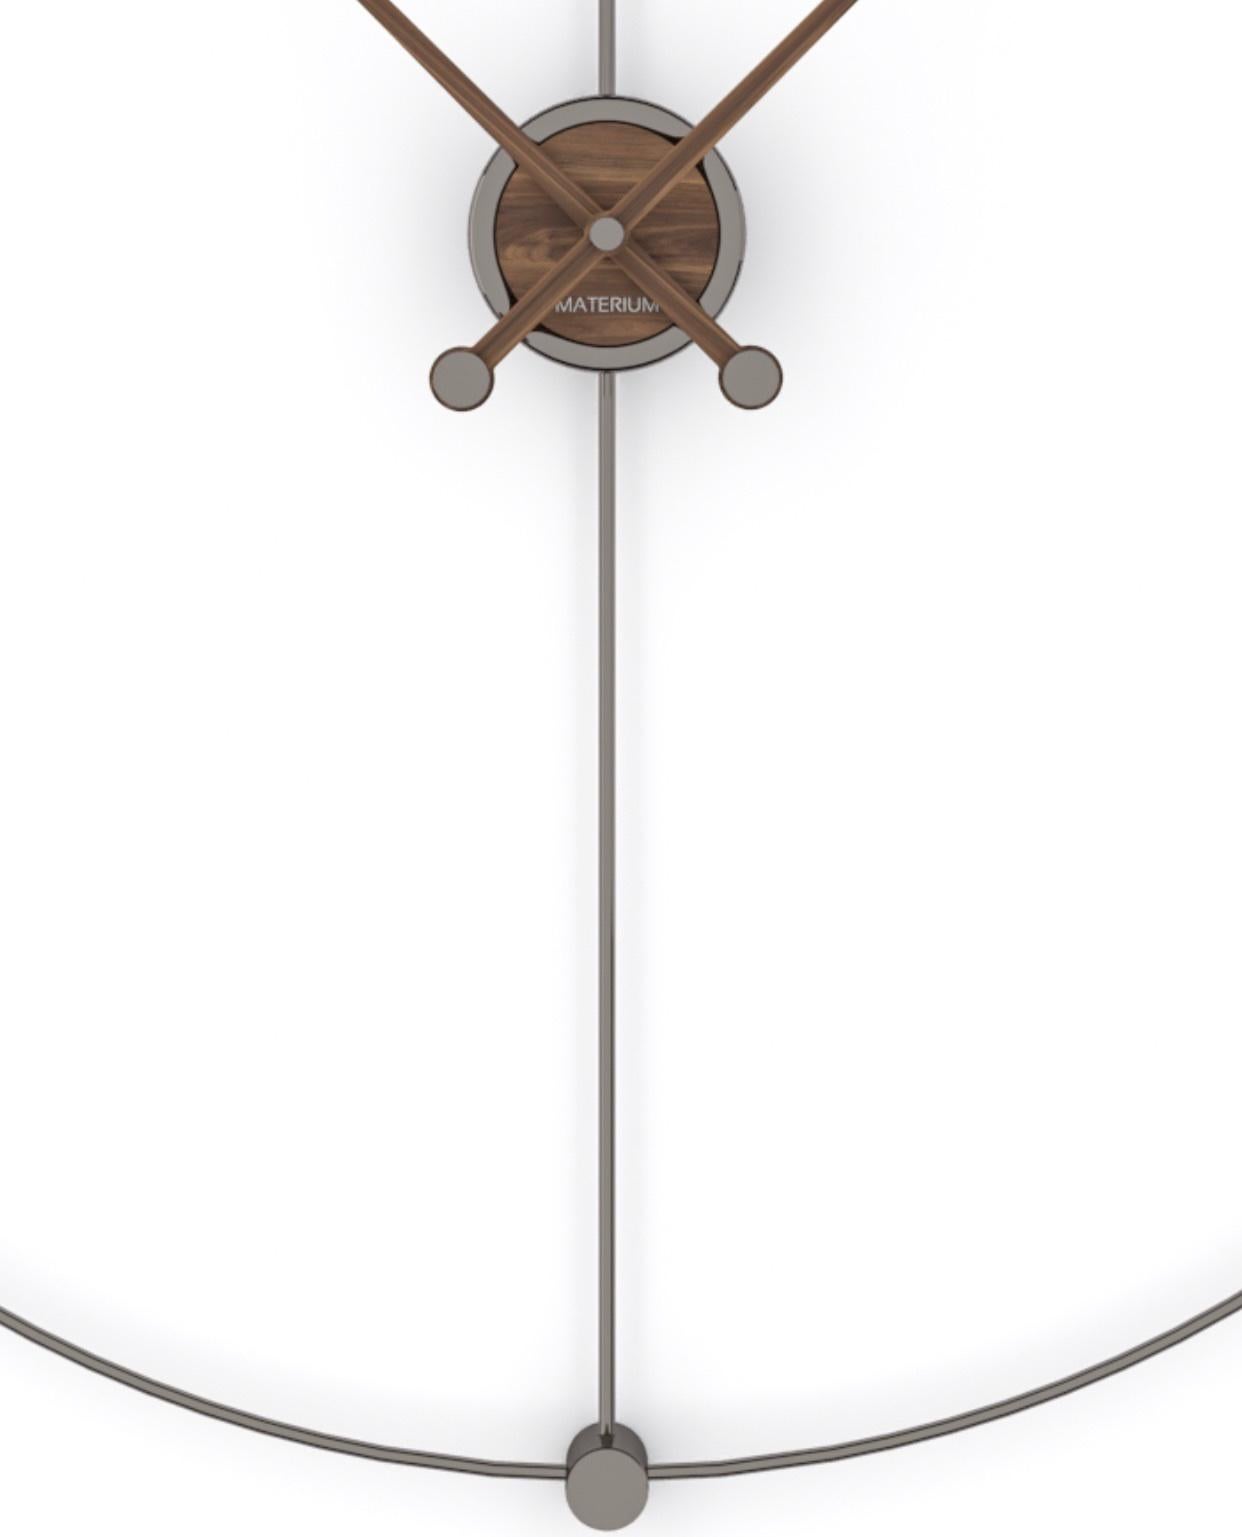 Contemporary Euclideo Wall Clock, Modern, Italy, 2019 For Sale